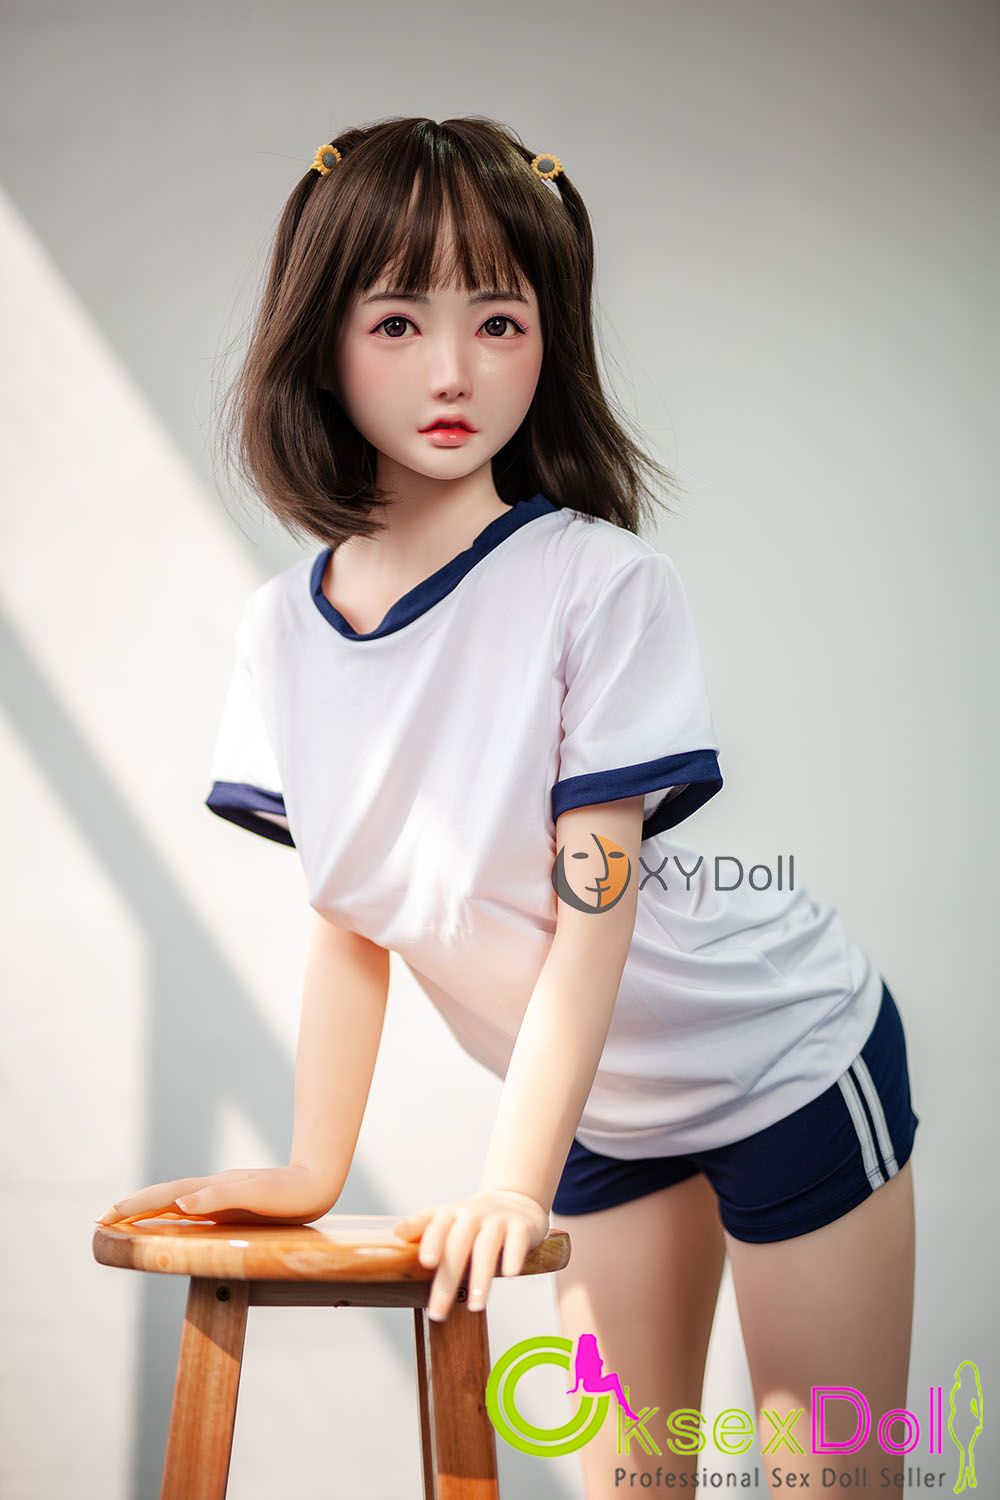 26kg Real Doll pic